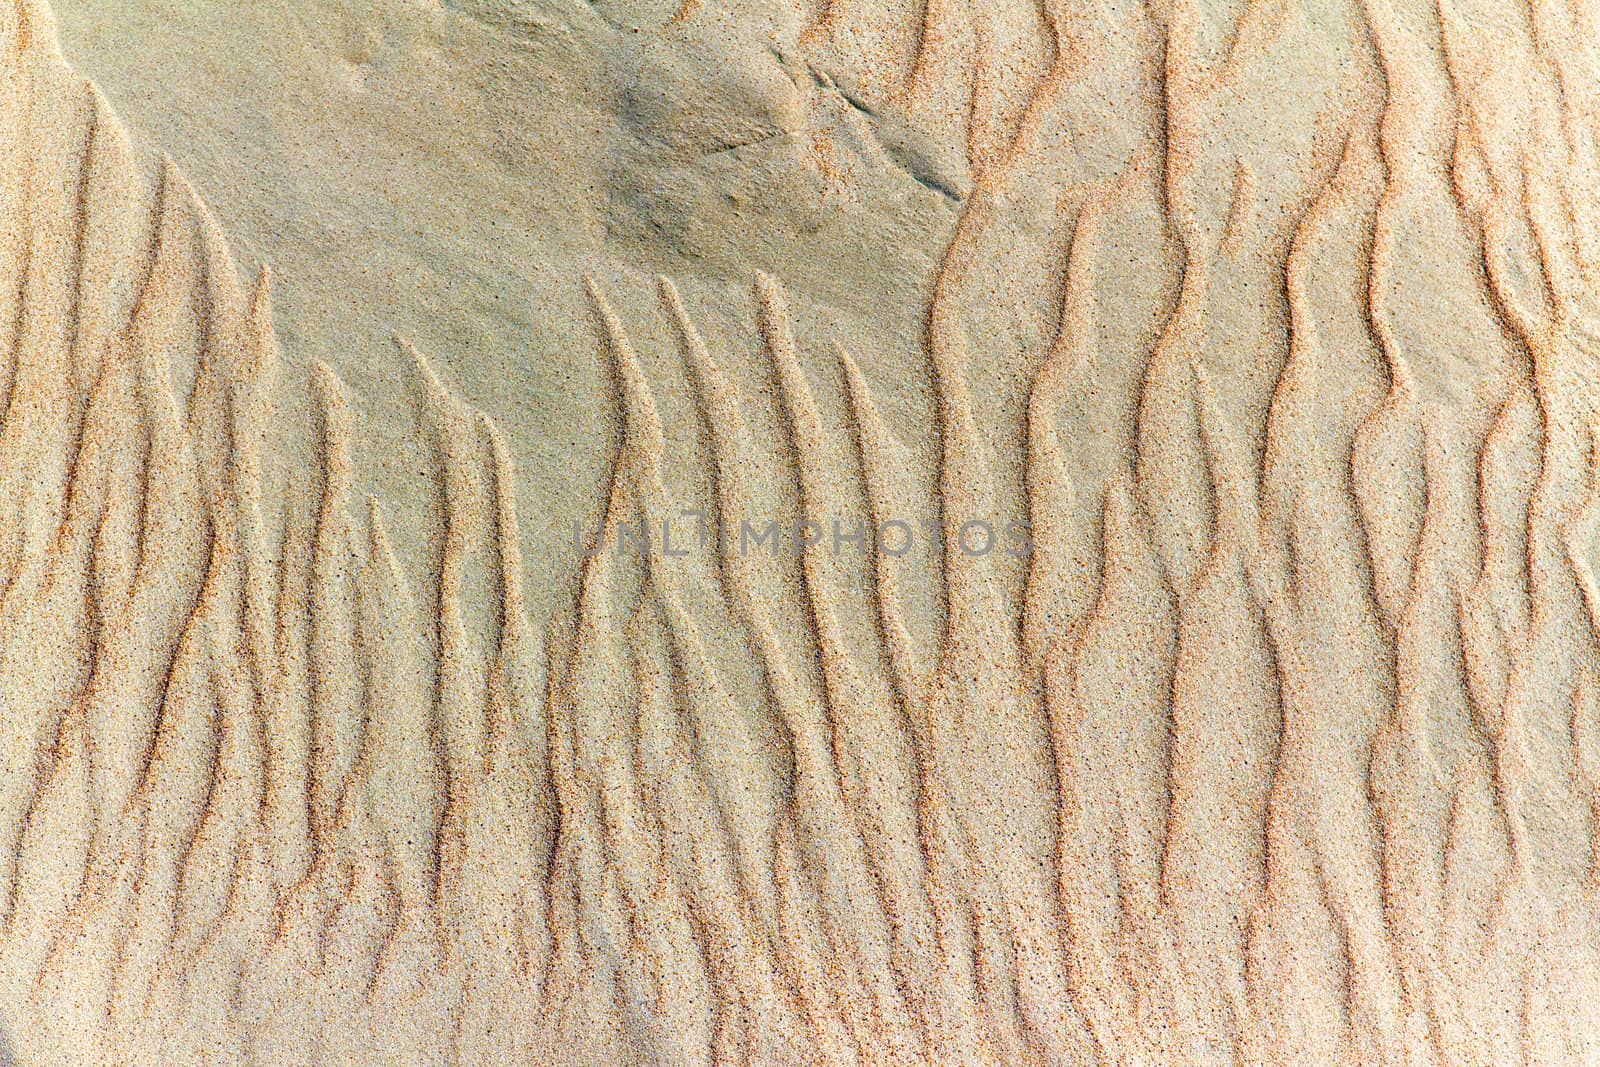 image of sand dunes in the background